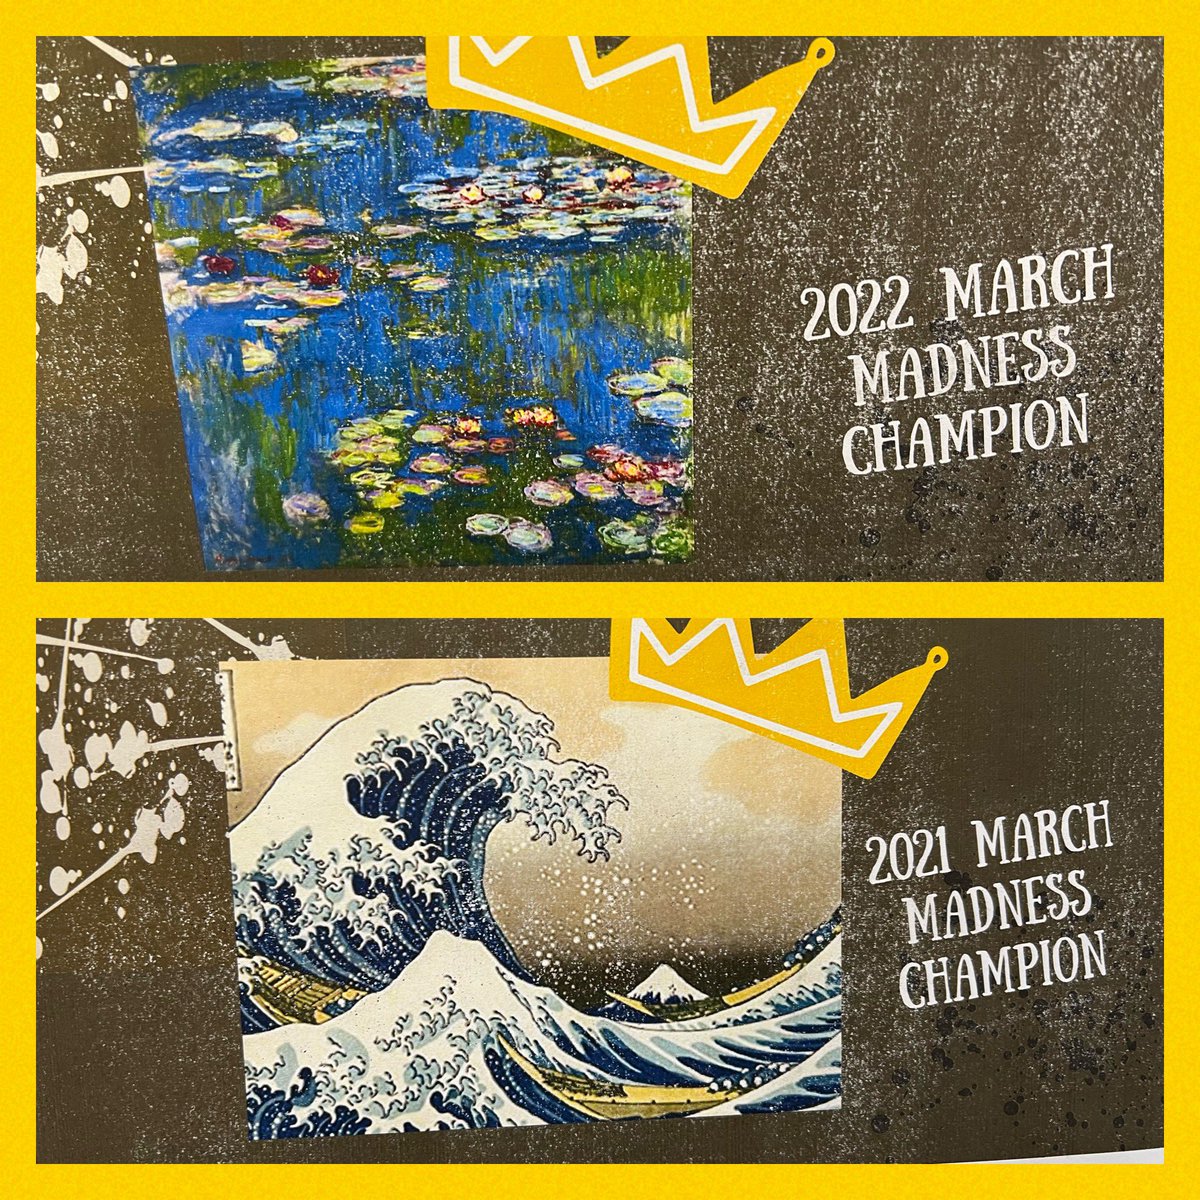 The results are in from March Madness: Art Room Edition! Congratulations to this year’s winner, Adam Fu! Take a look at the photos to see current and past winners. #WeAreChelsea #LevelUp